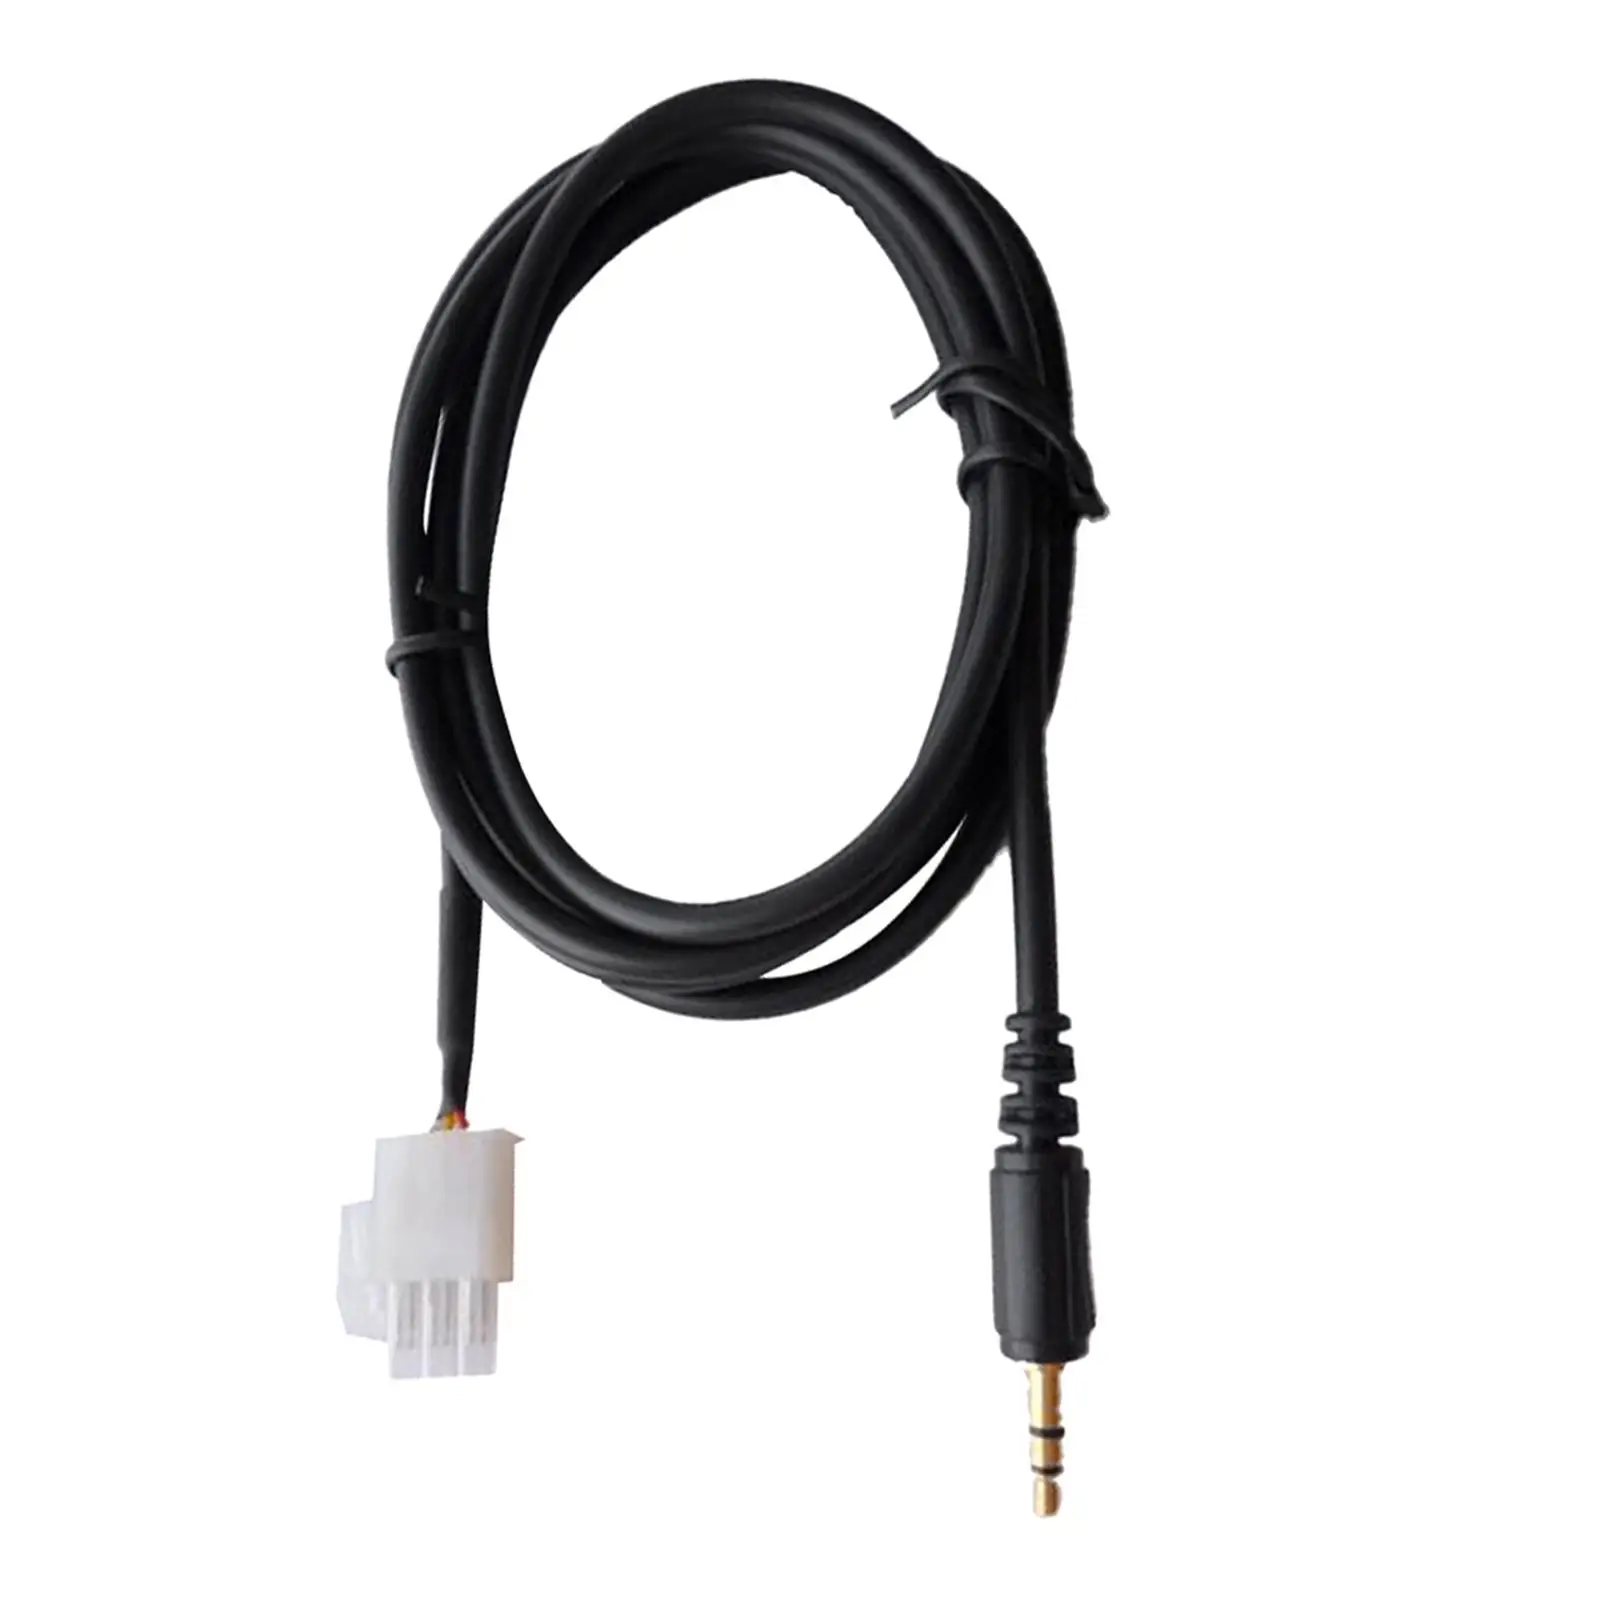 1. Motorcycle MP Adapter 3.5mm AUX Cord Cable for  0, 2013-2014  F6B 